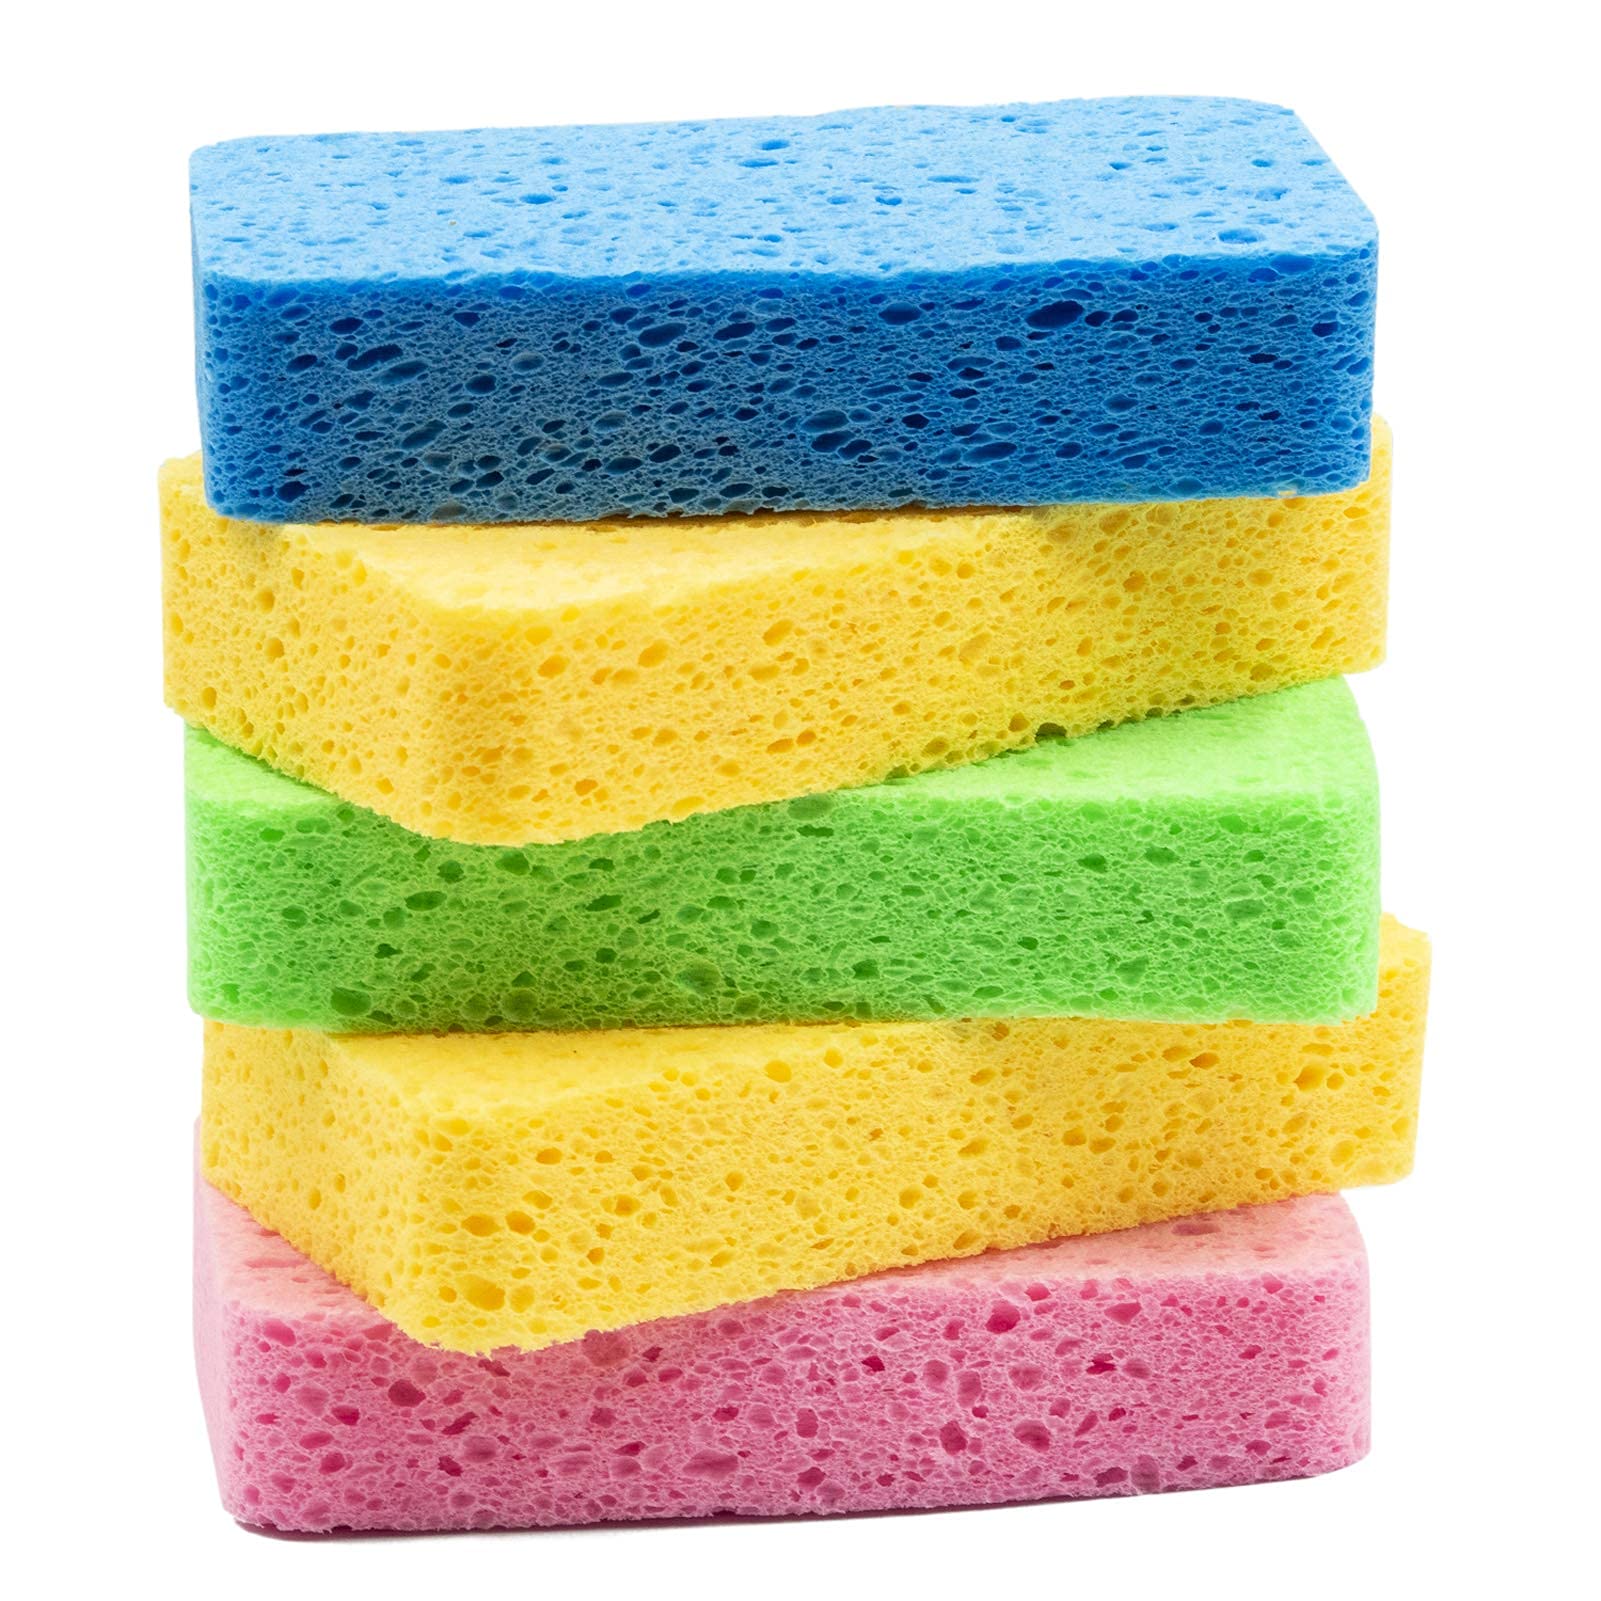 Zhengmy Kitchen Sponge Natural Sponges for Dishes Compressed Wood Pulp  Sponges for Cleaning Sponge Without Scratching for Kitchen Bathroom, 3.9 x  2.4